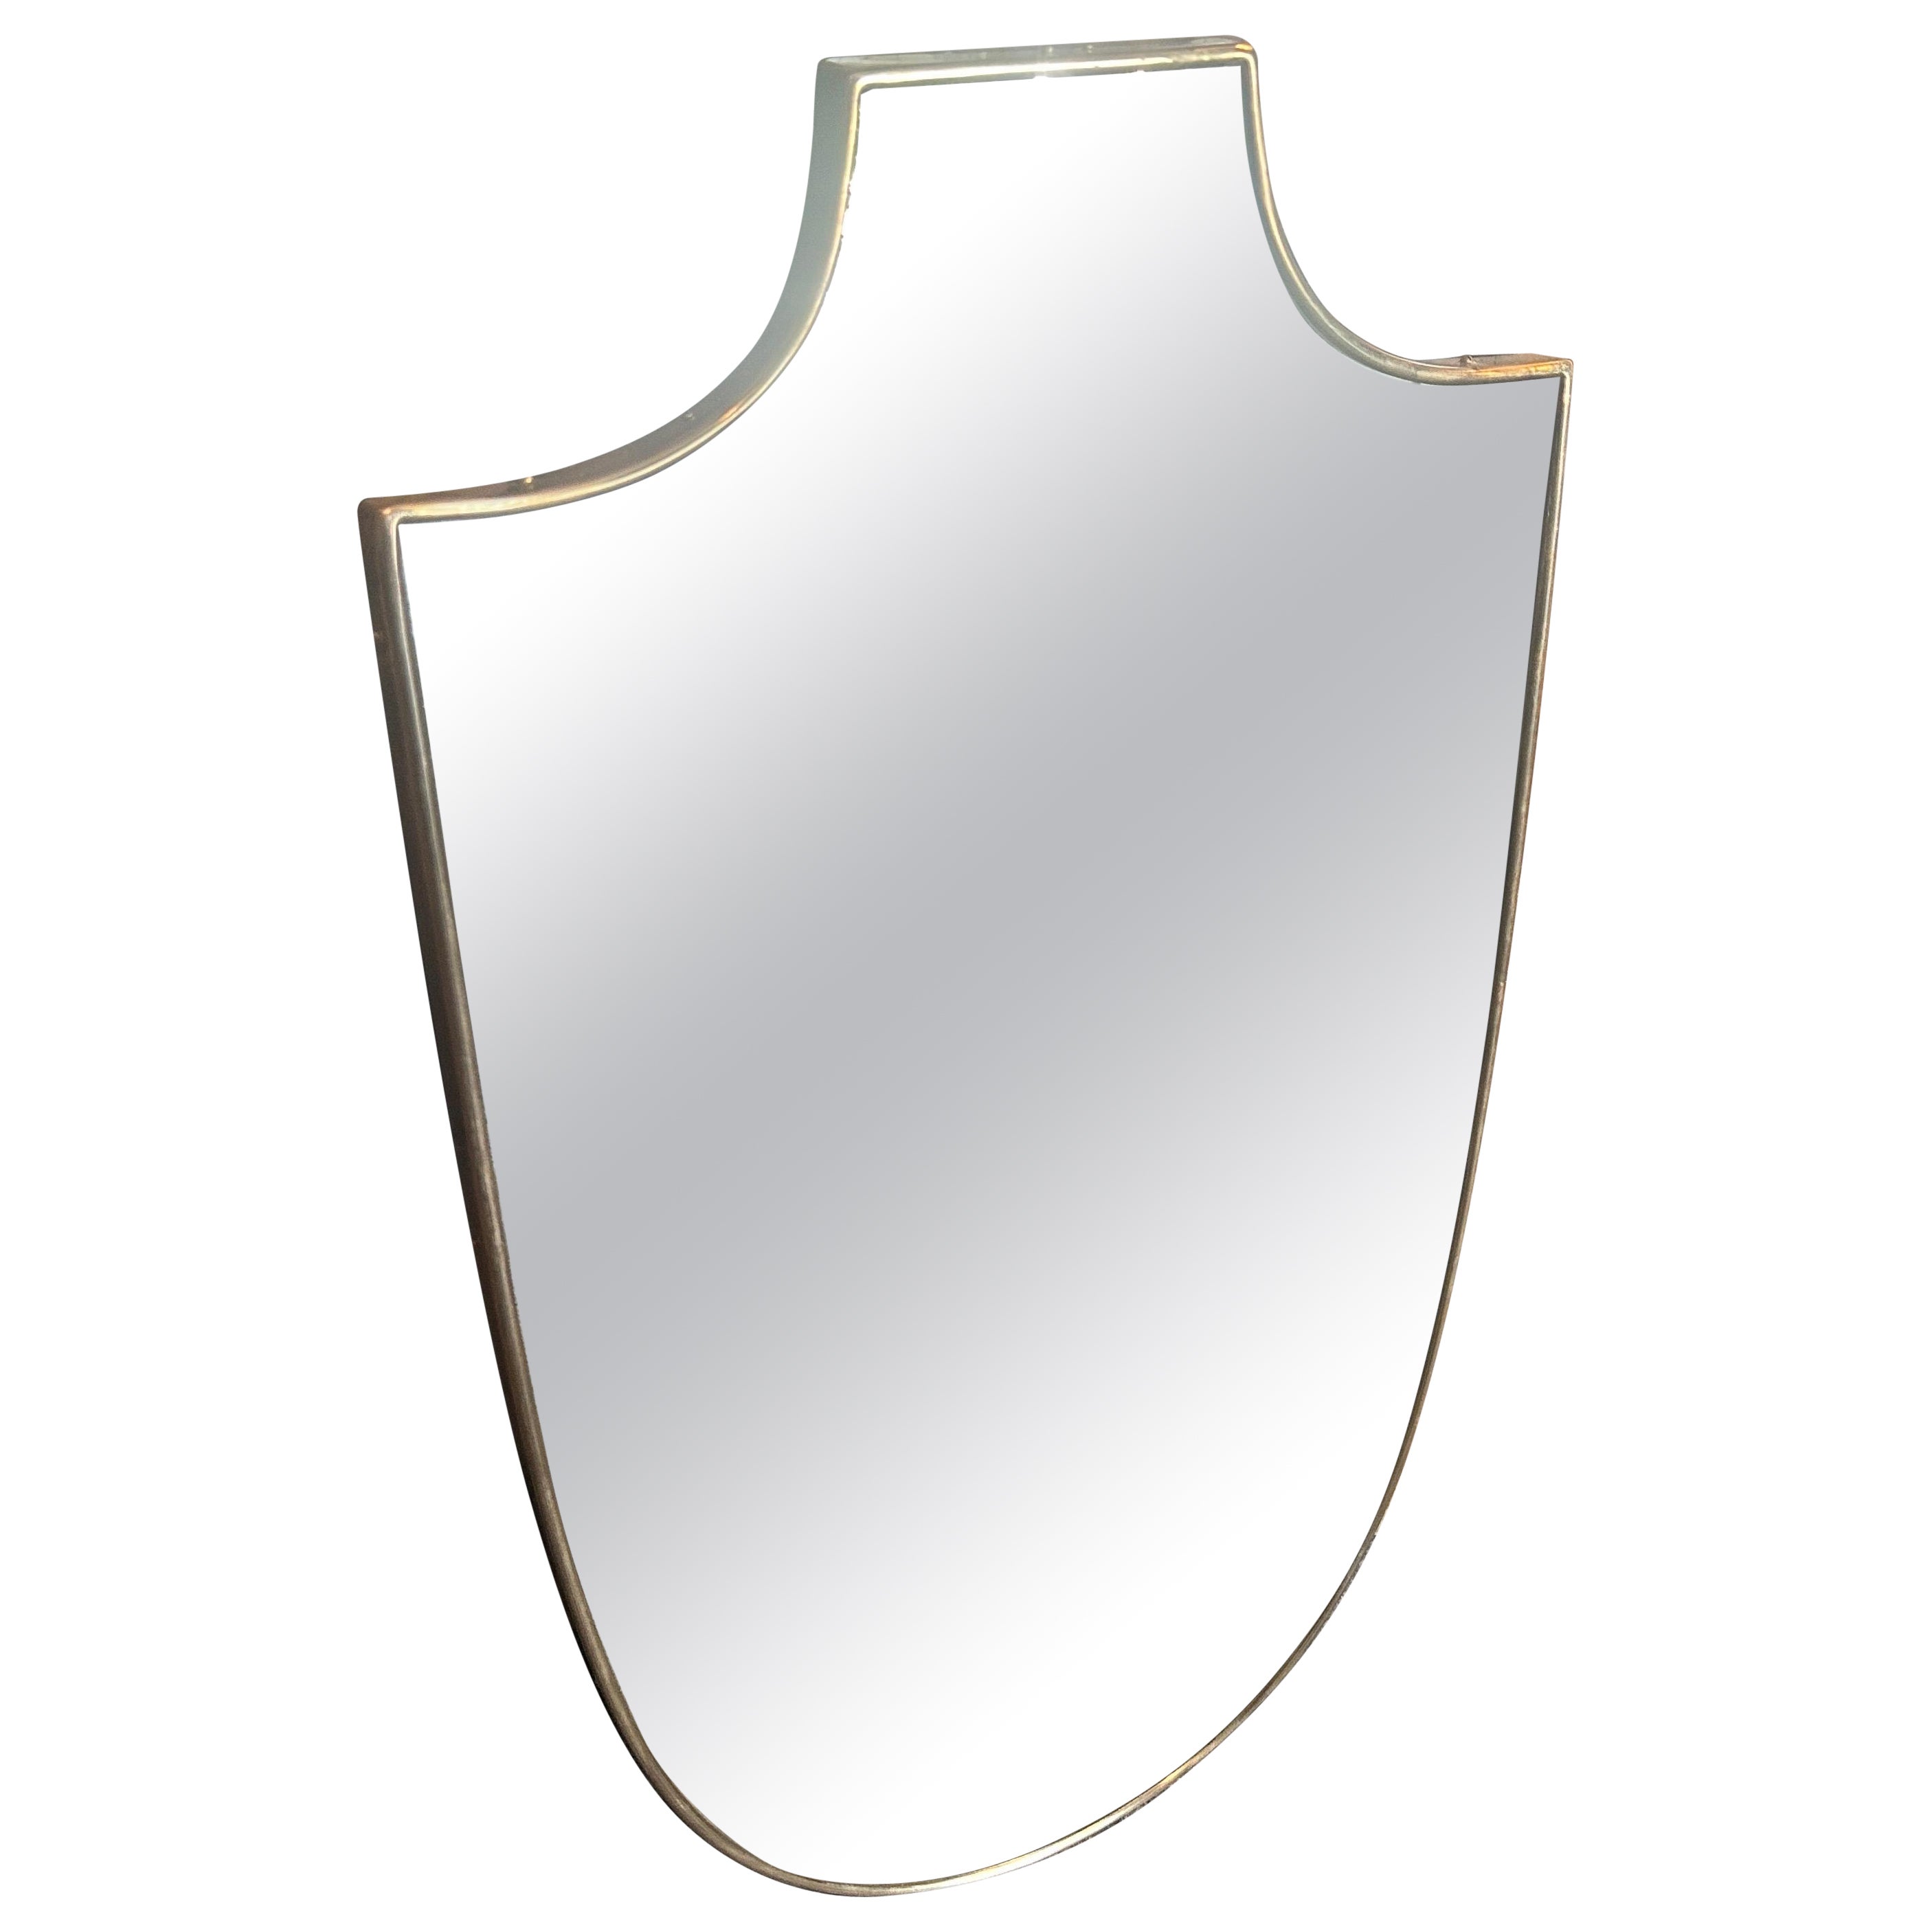 1950s Gio Ponti Style Mid-century Modern Brass Shield Shaped Wall Mirror For Sale